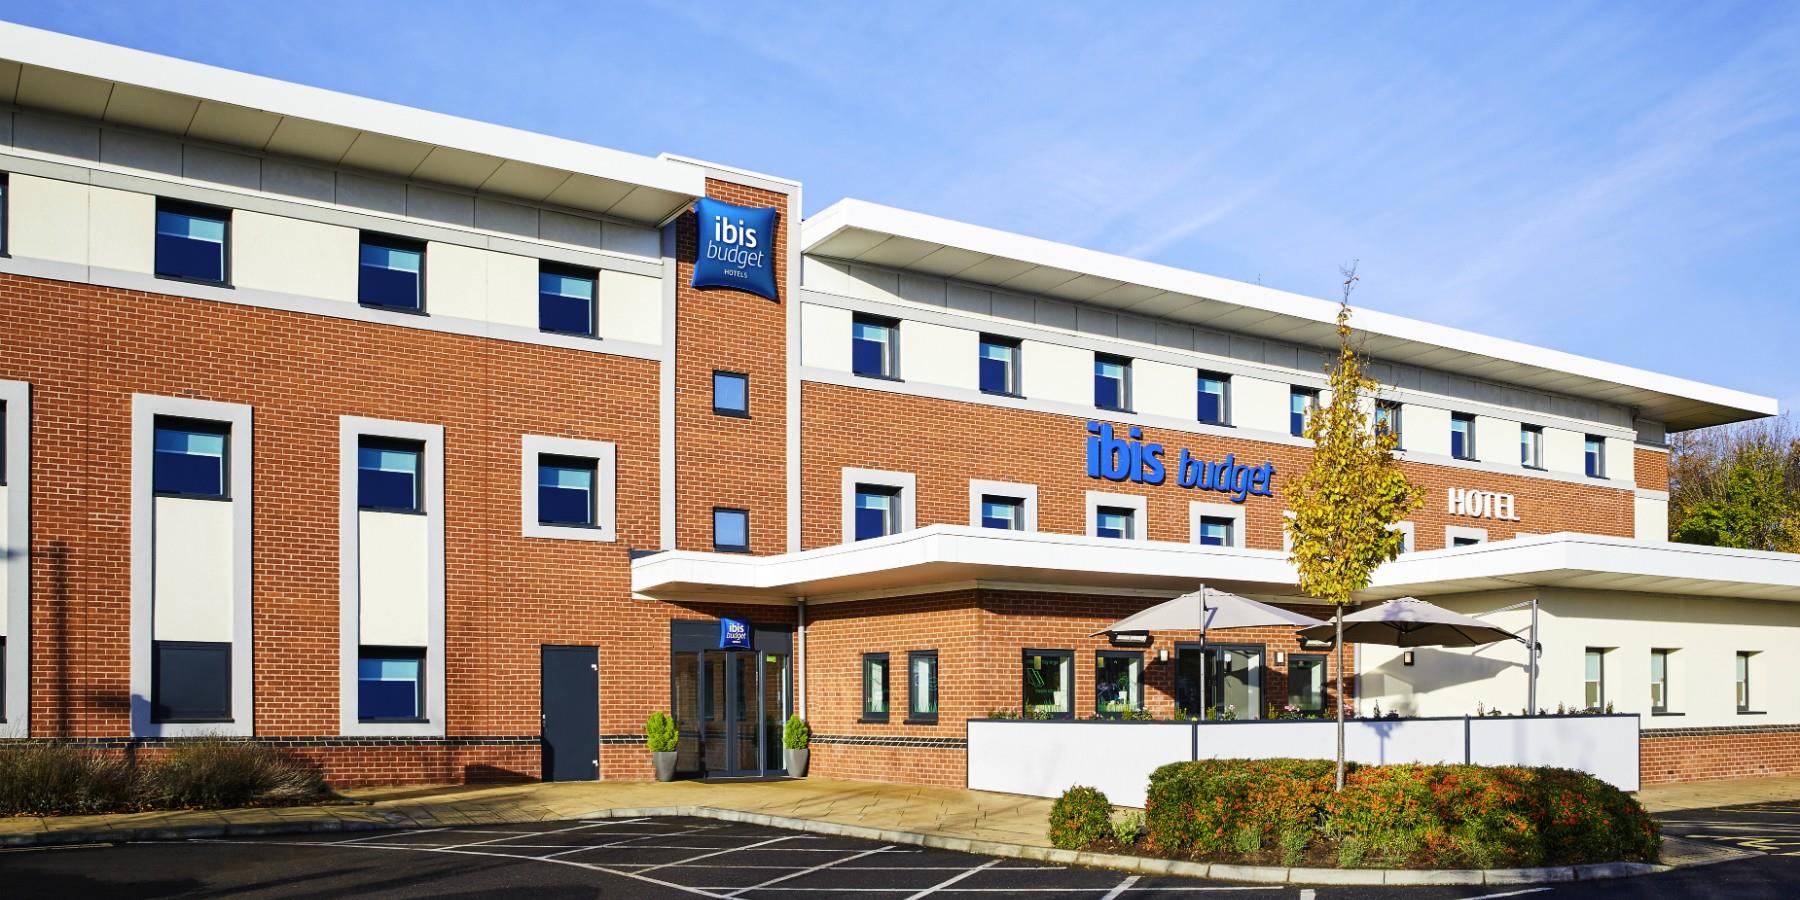 Ibis Budget Leicester - Accommodation in Leicester